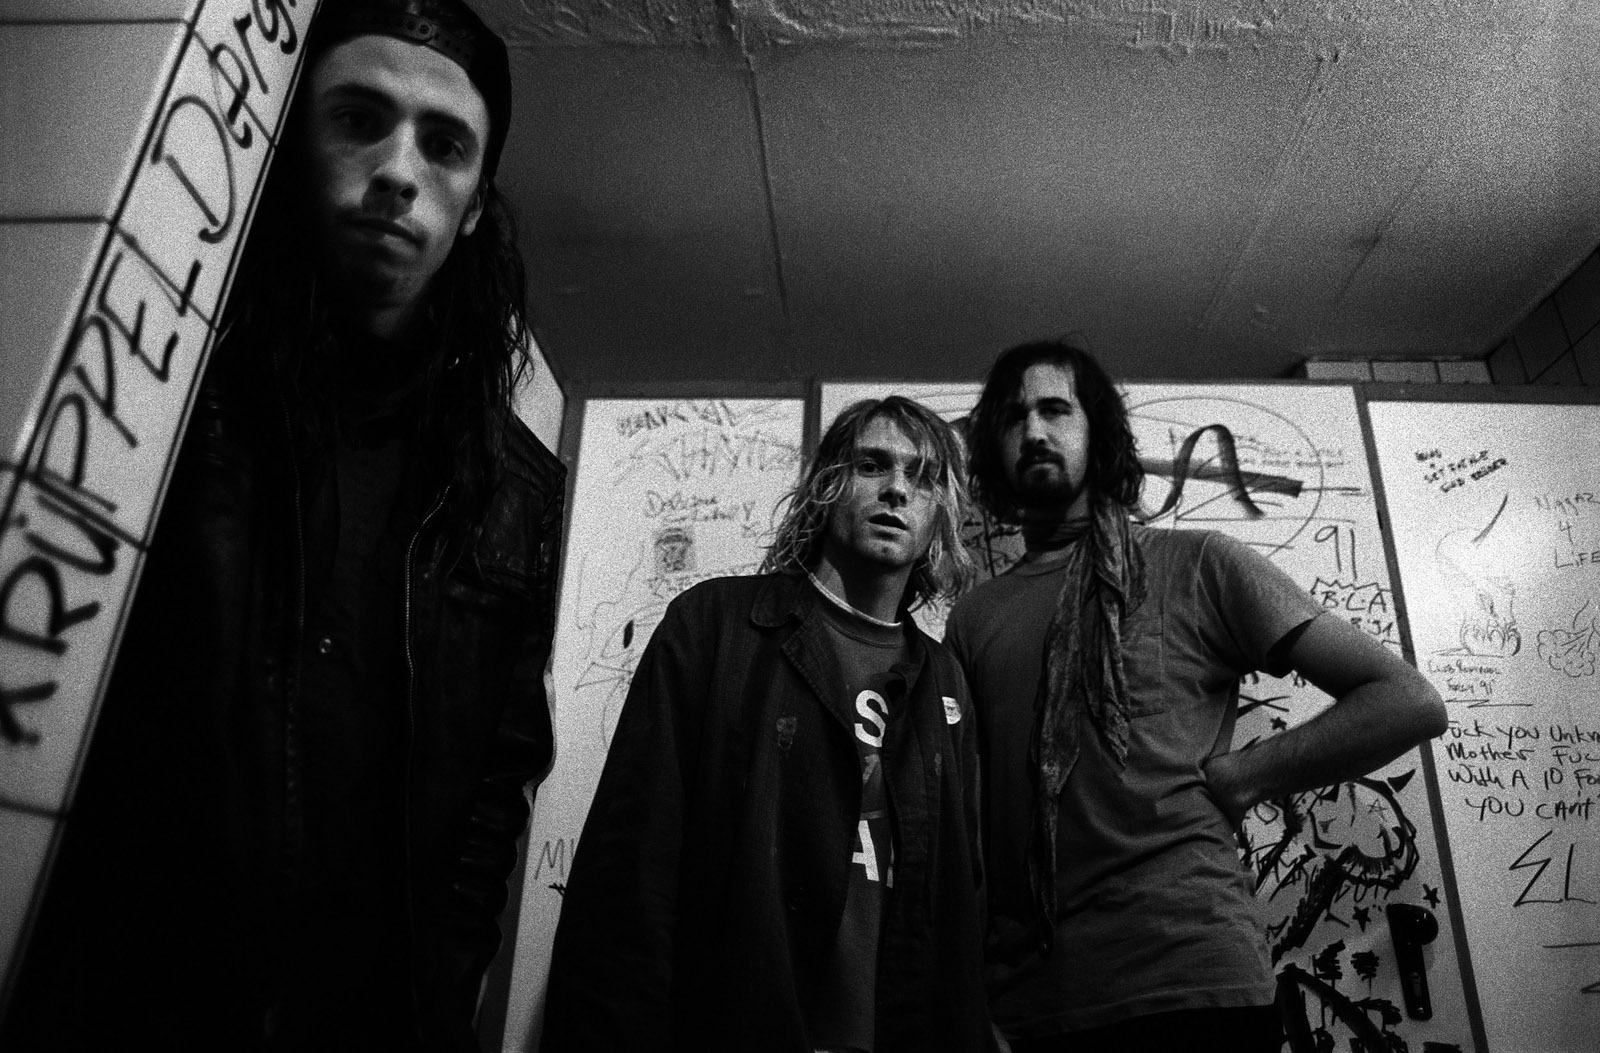 Nirvana in 1991 with Dave Grohl, Kurt Cobain, and Krist Novoselic